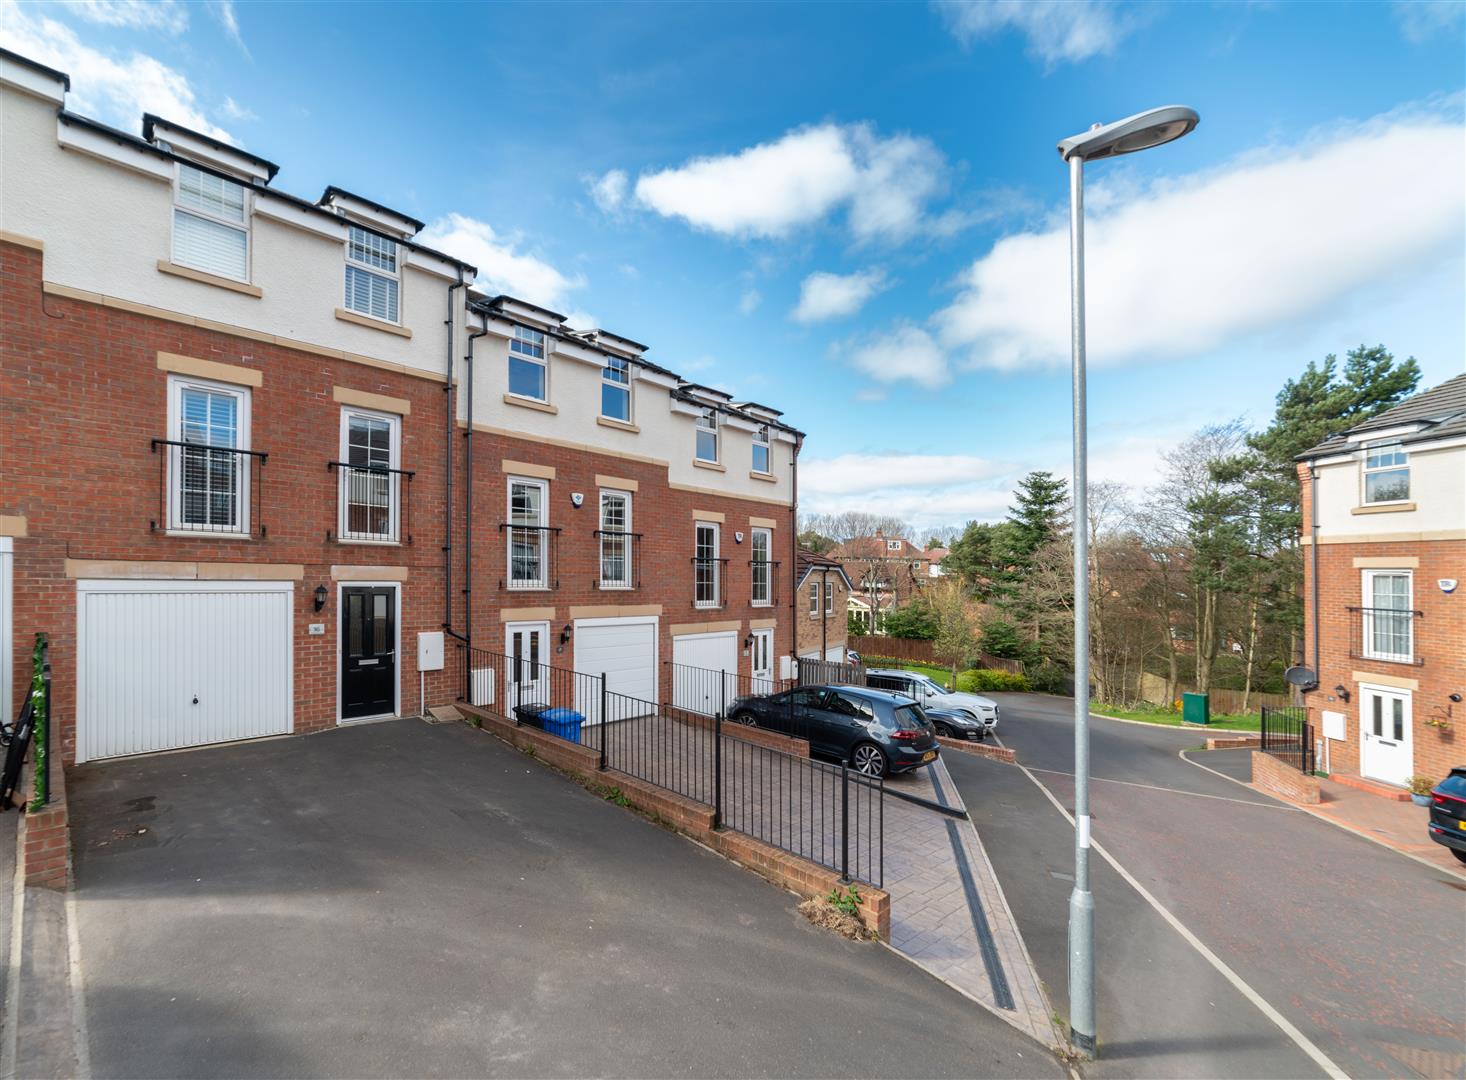 3 bed town house for sale in Loansdean Wood, Morpeth, NE61